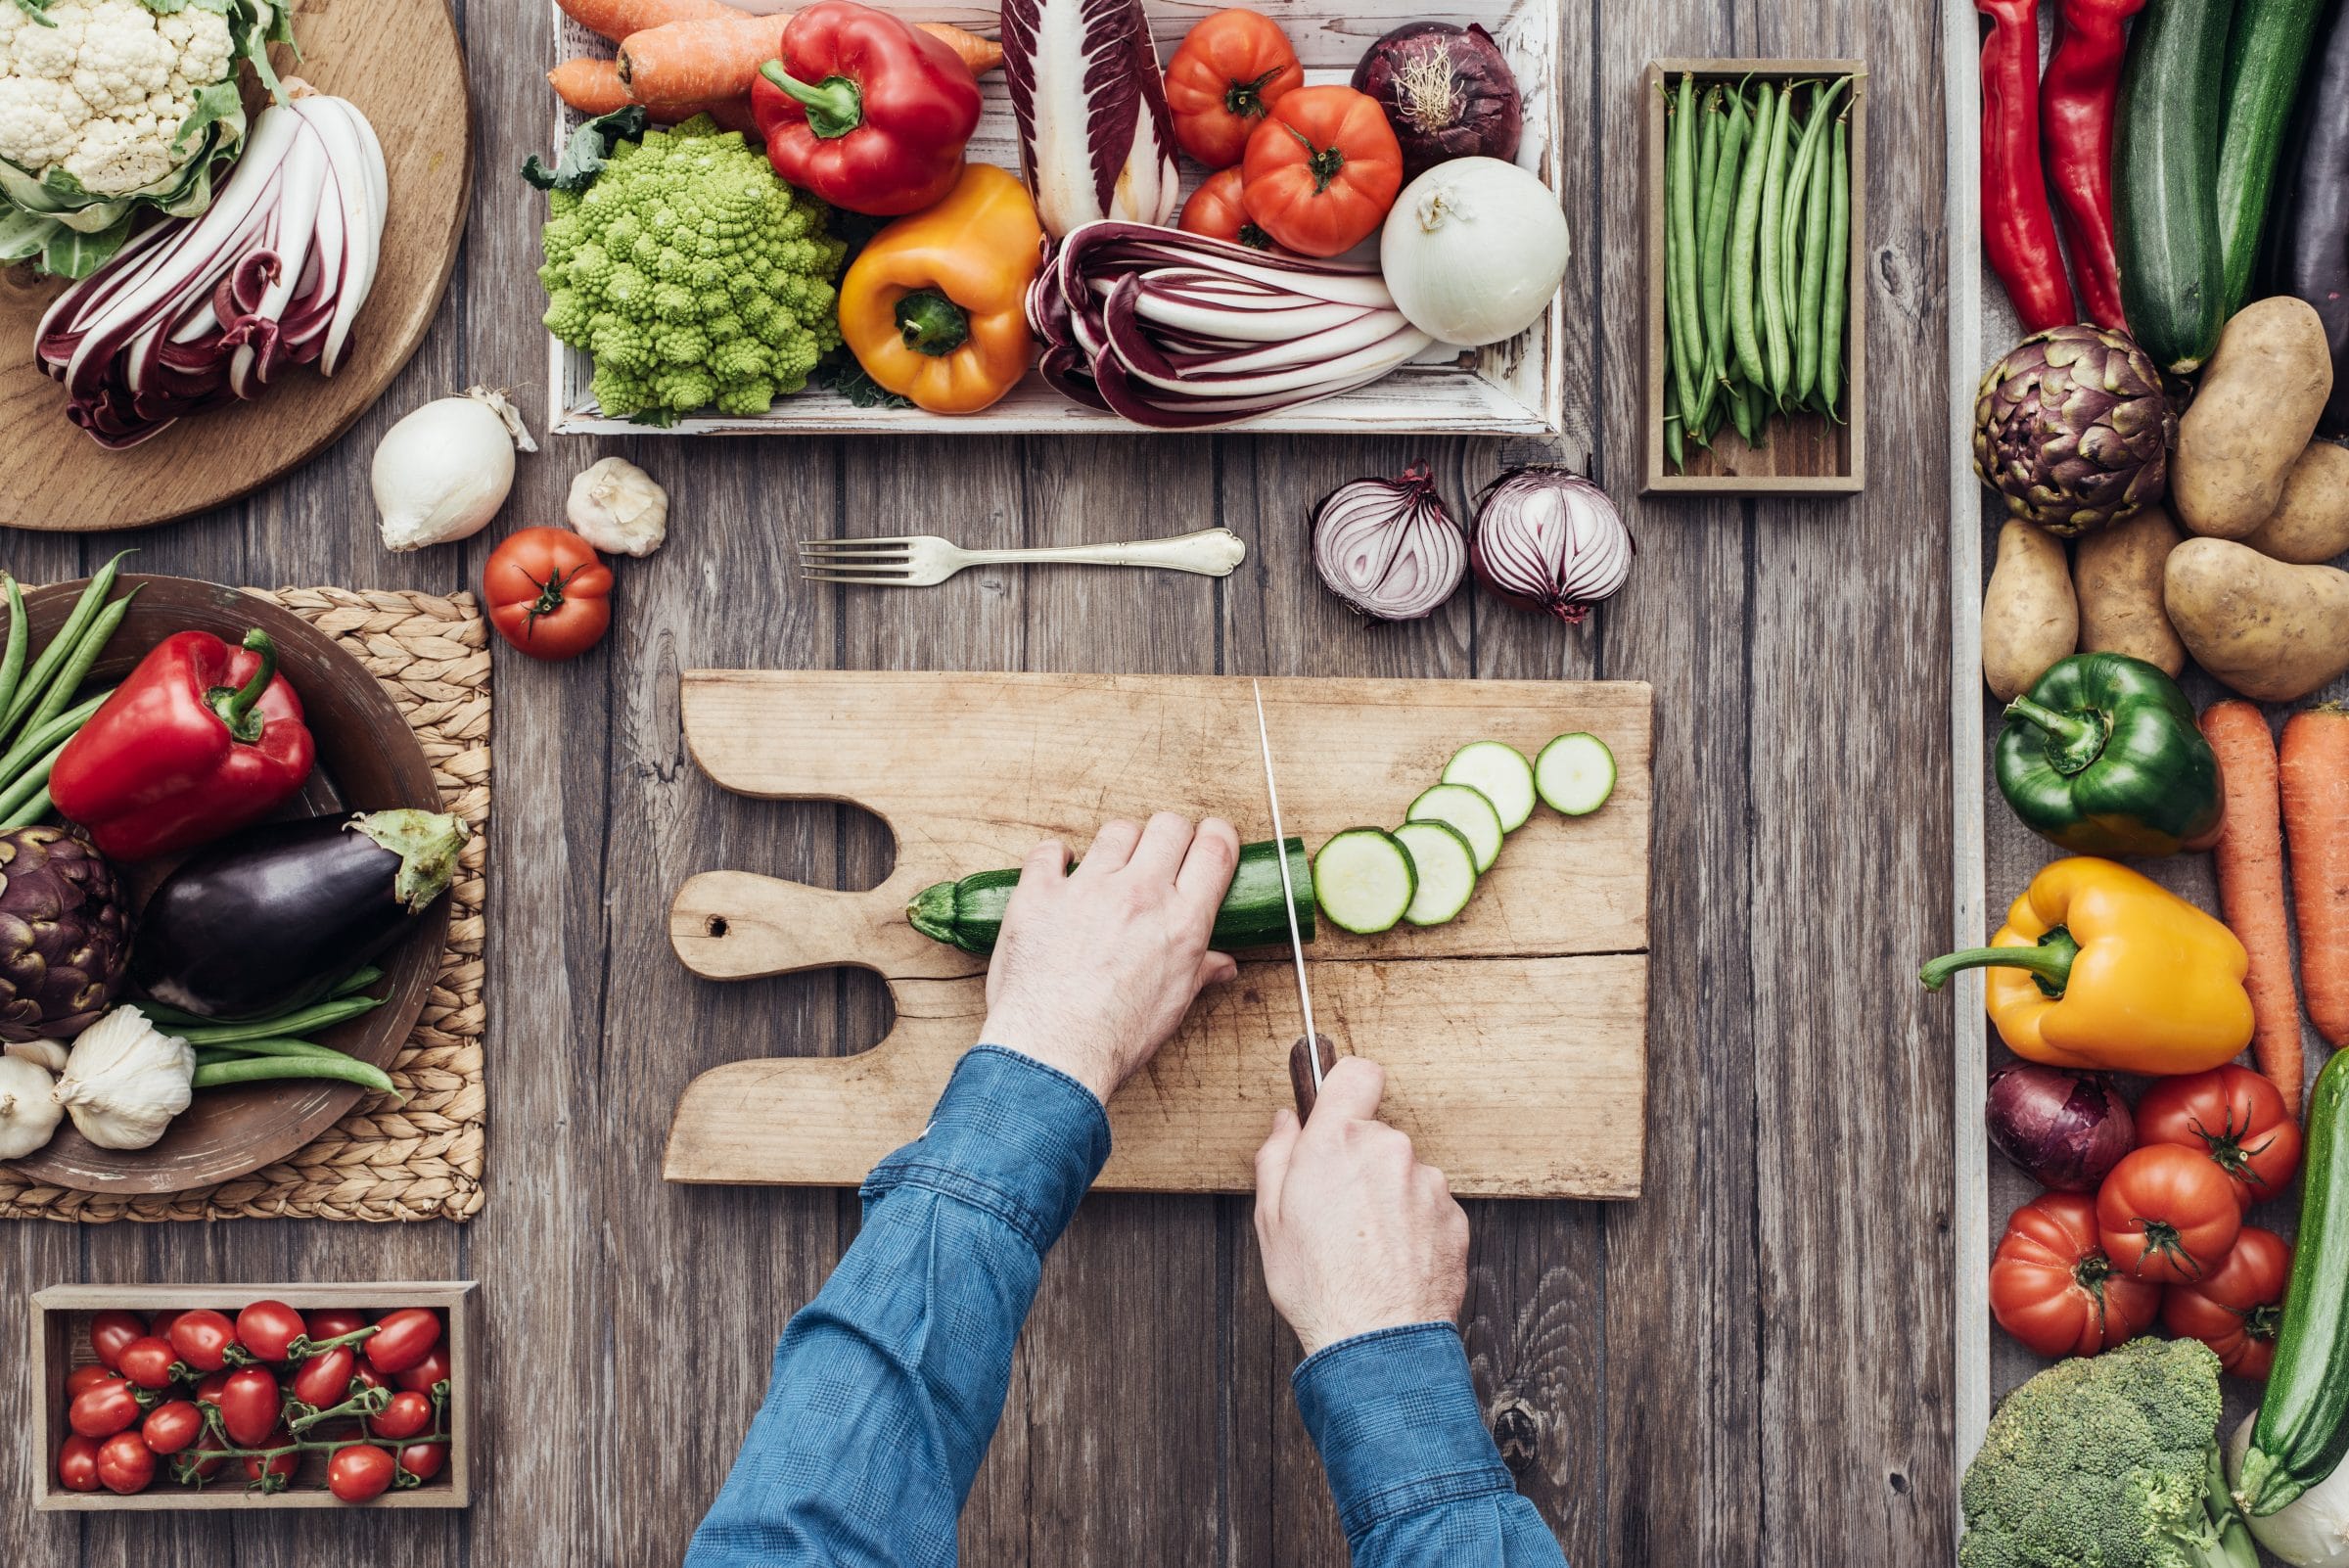 An overview shot of hands cutting a cucumber. Various colourful vegetables surround the cutting board.